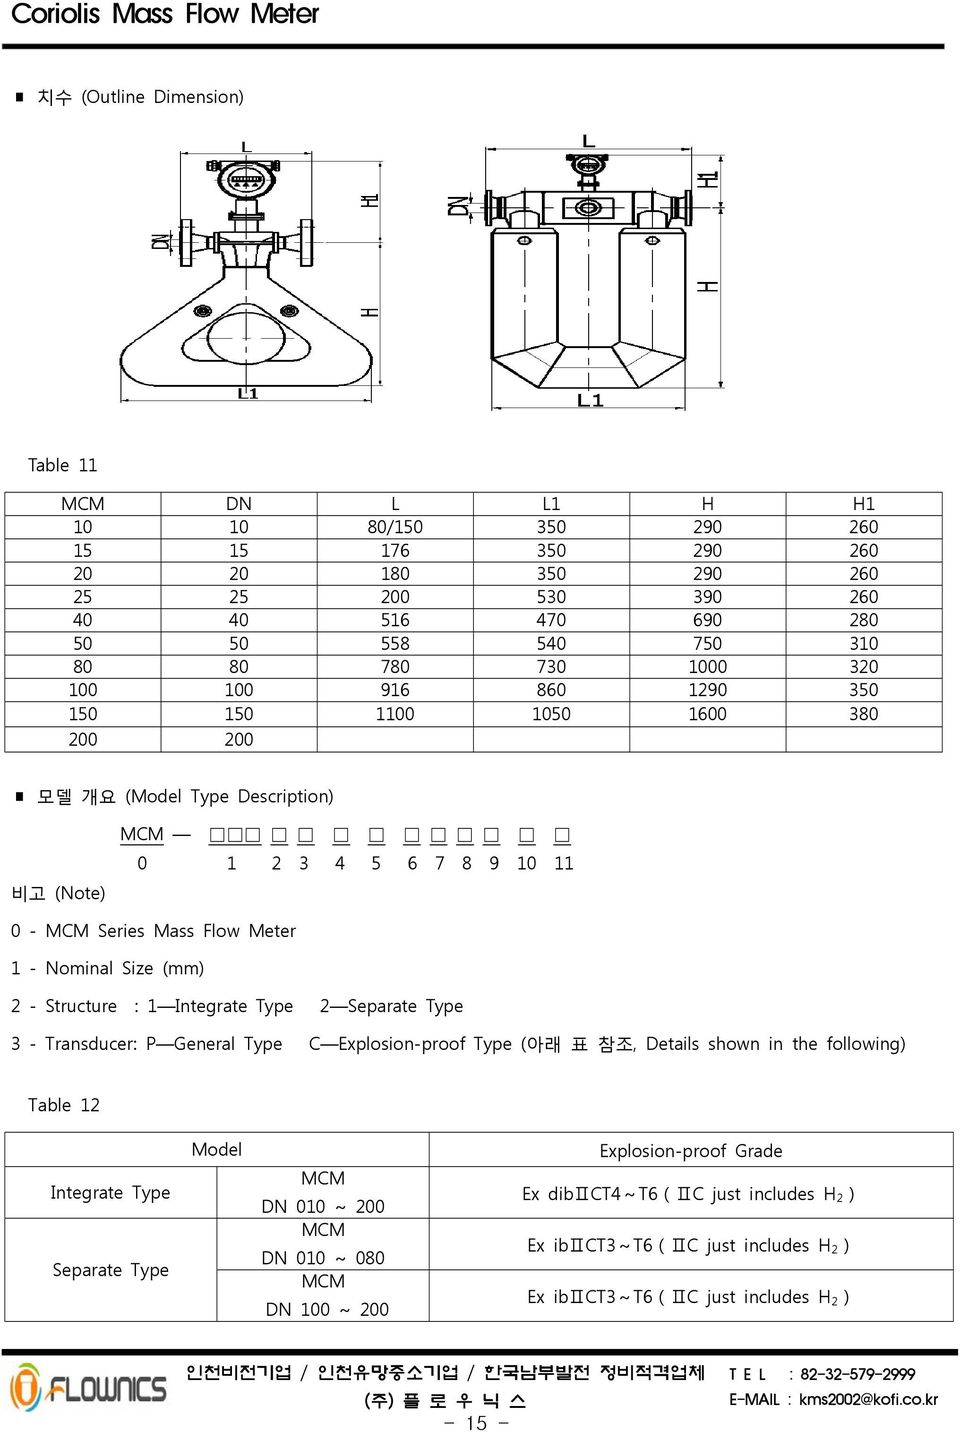 Size (mm) 2 - Structure : 1 Integrate Type 2 Separate Type 3 - Transducer: P General Type C Explosion-proof Type (아래 표 참조, Details shown in the following) Table 12 Integrate Type Separate